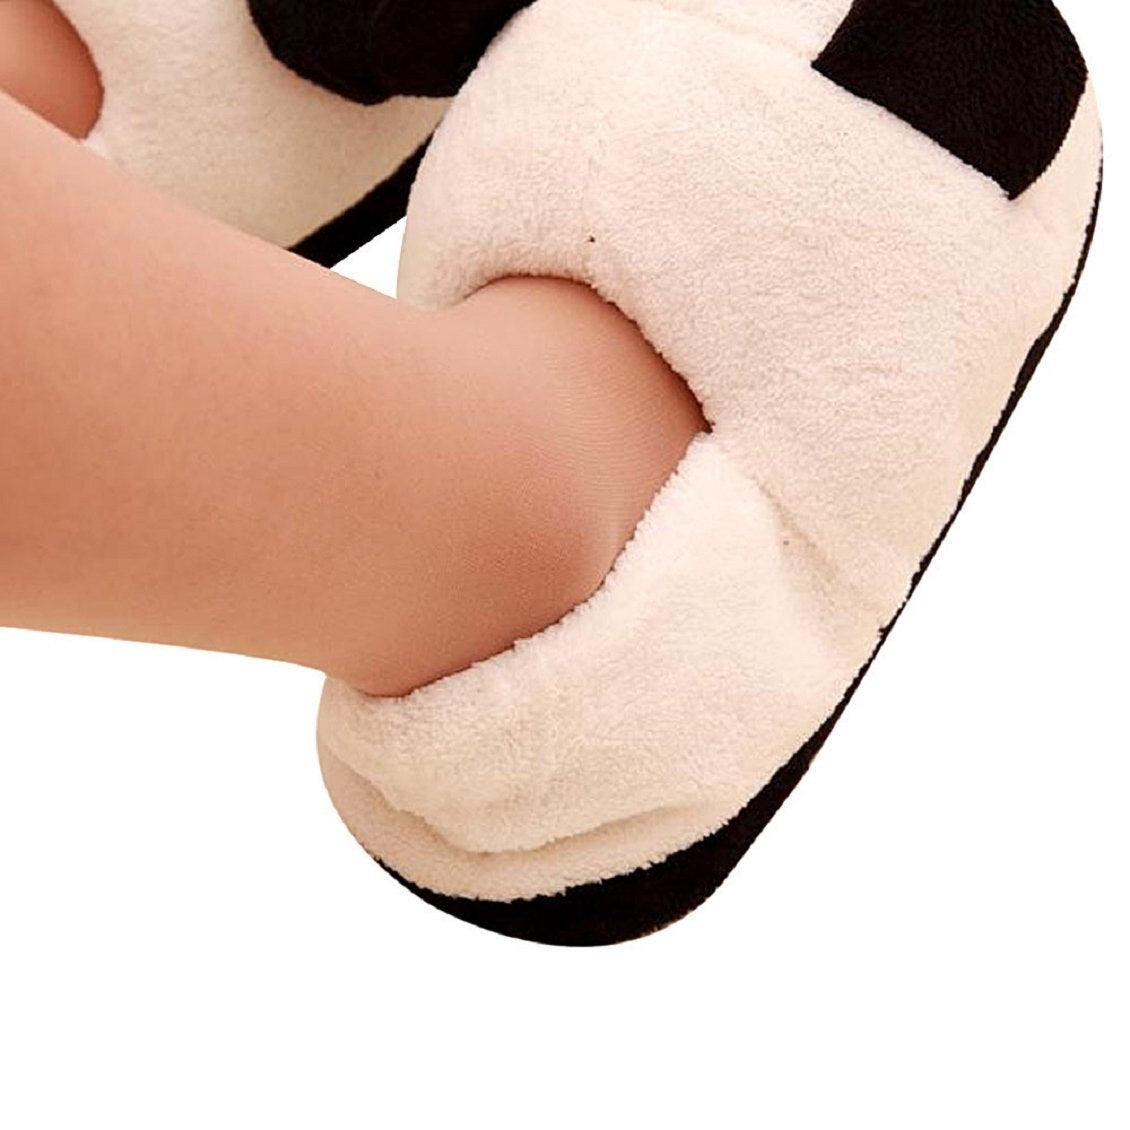 Black and white panda eyes crying face cotton slippers Men's Panda Plush Winter Non-slip Warm House Indoor Slippers - ebowsos